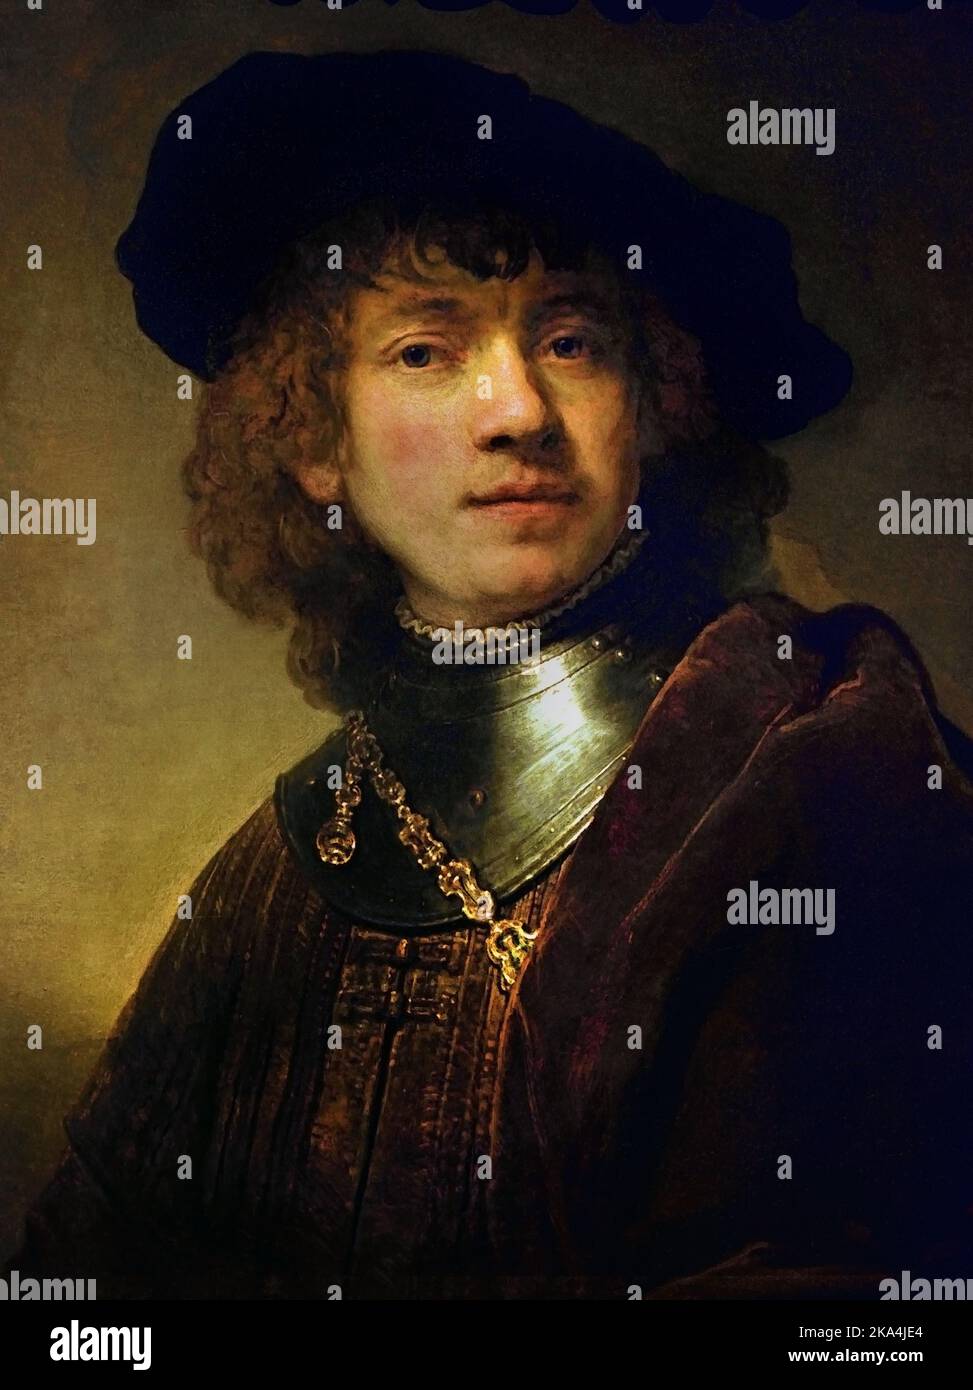 Self-portrait as a young man - Young Man in a Gorget and Cap by Rembrandt, Rembrandt Harmenszoon van Rijn, 1606-1669, The, Netherlands, Dutch, Stock Photo